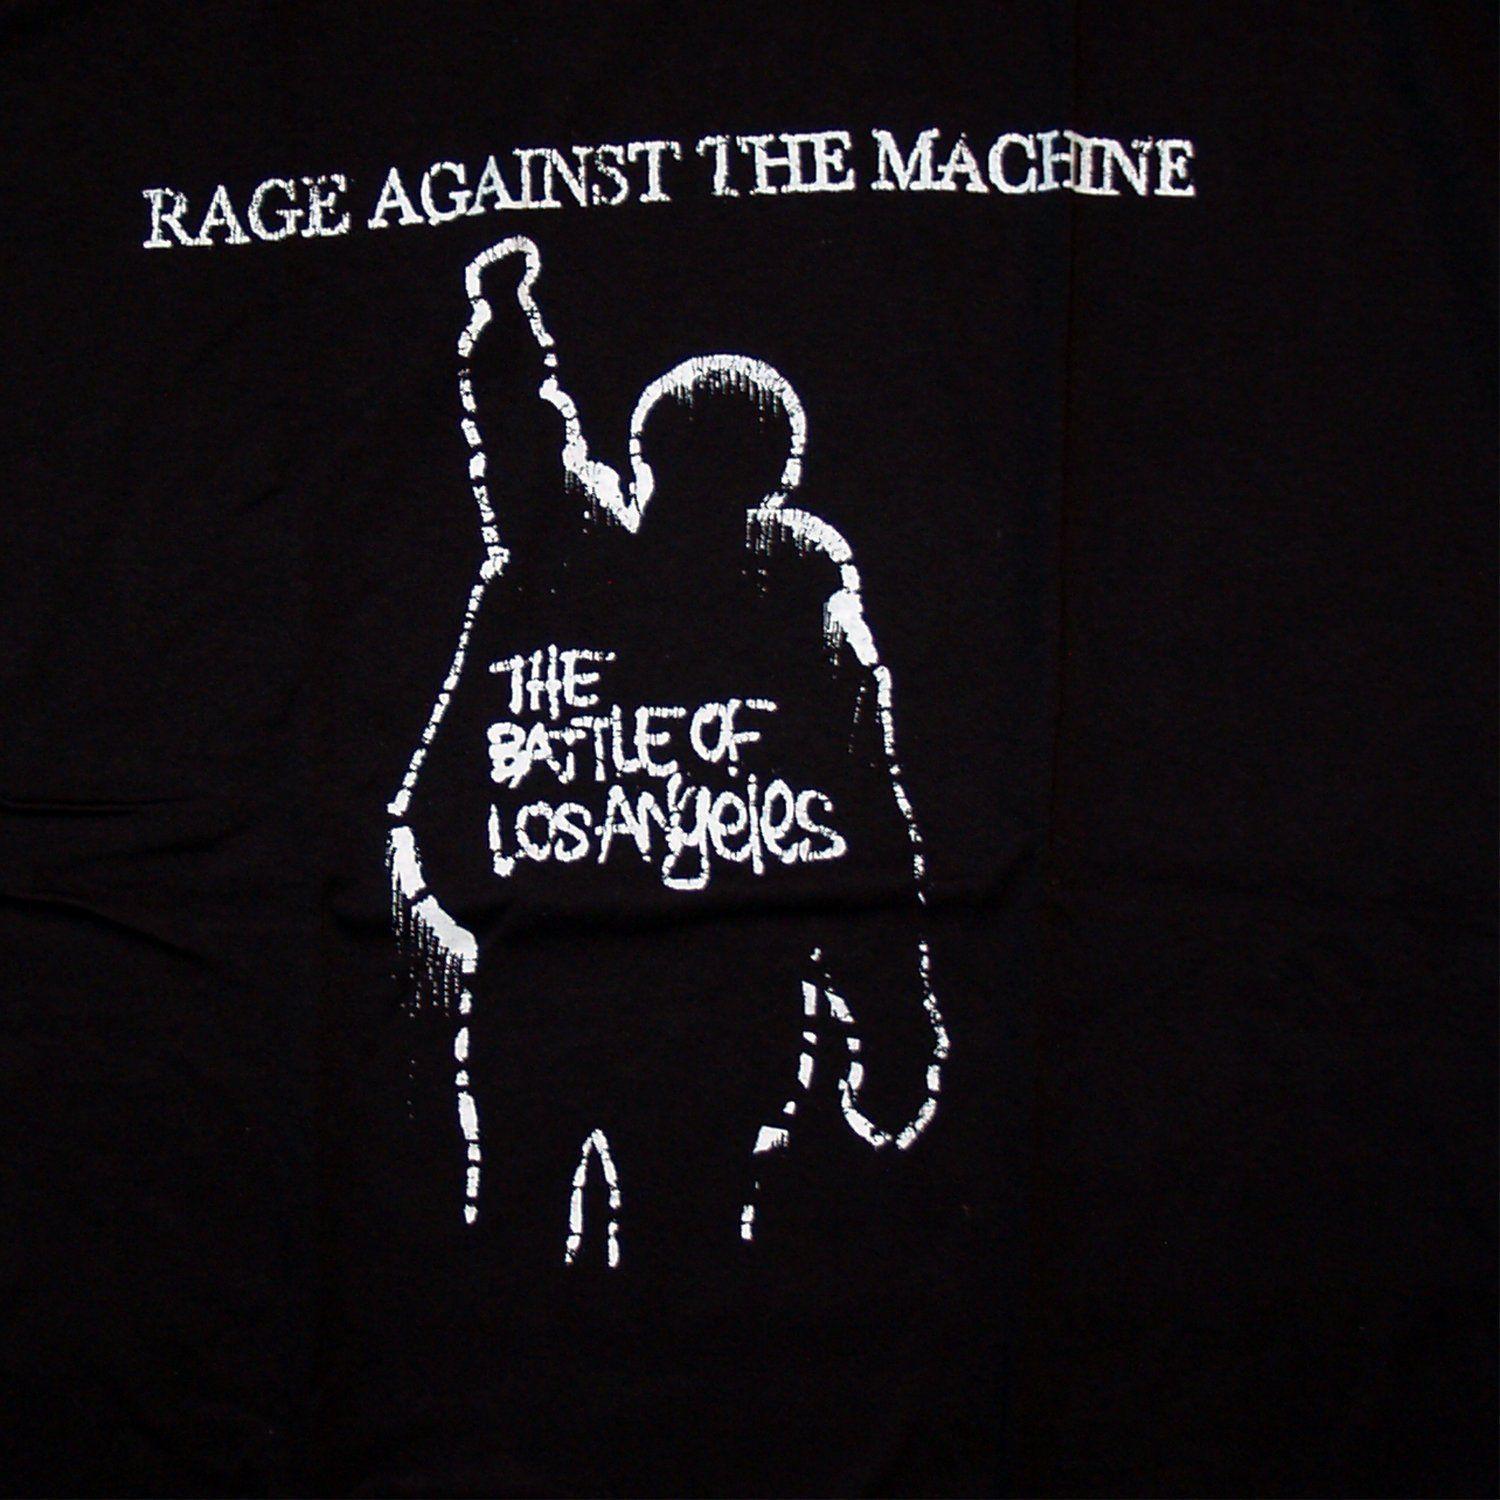 Rage against the machine android wallpaper HD of modified